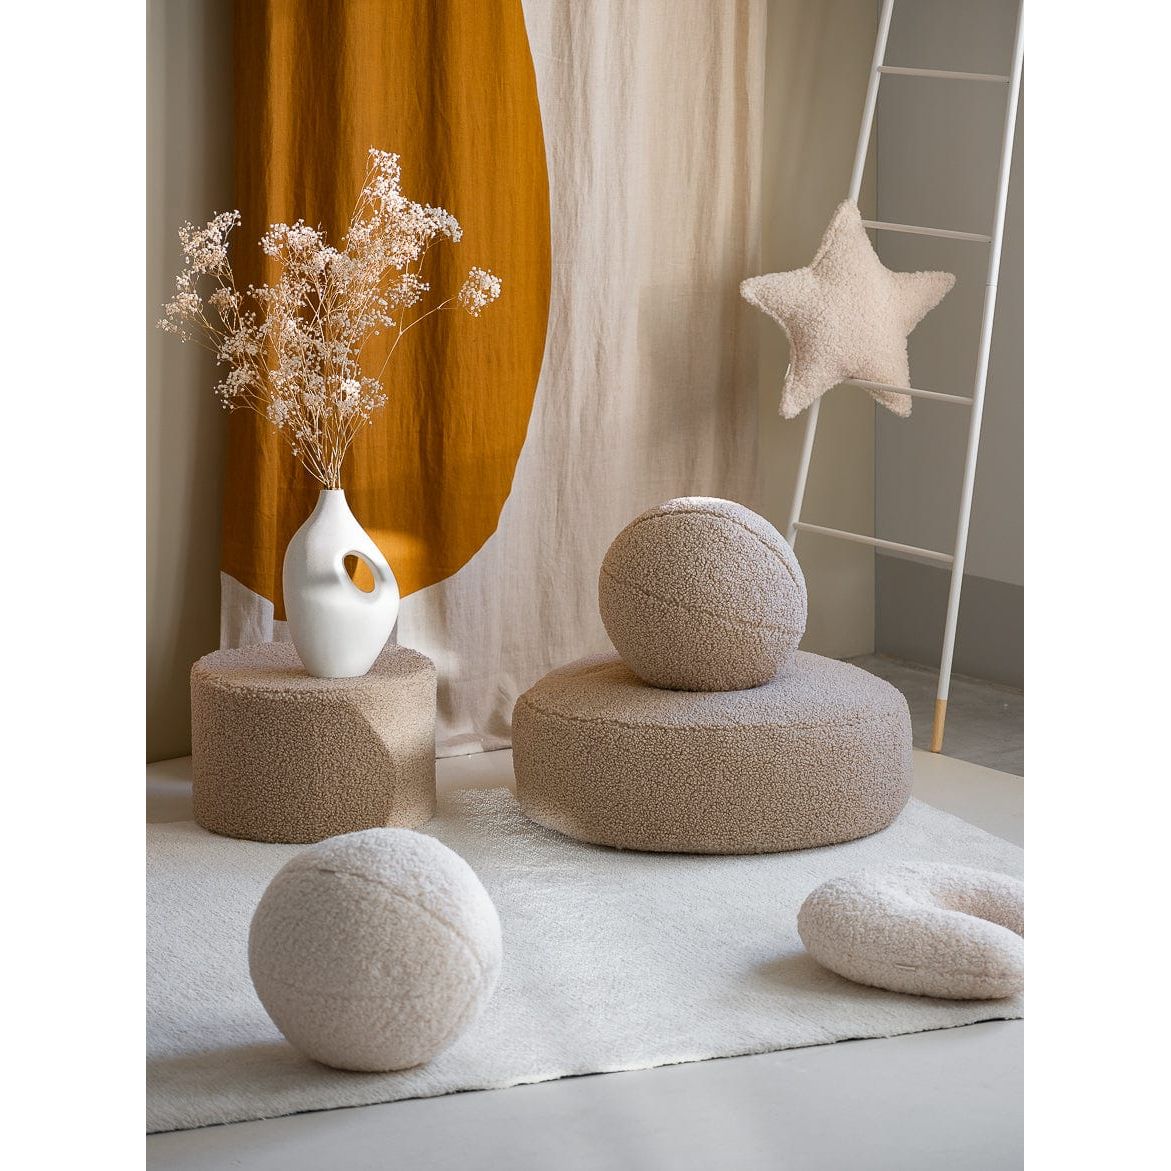 Wigiwama Biscuit Ball Cushion in room with side table and pouffe